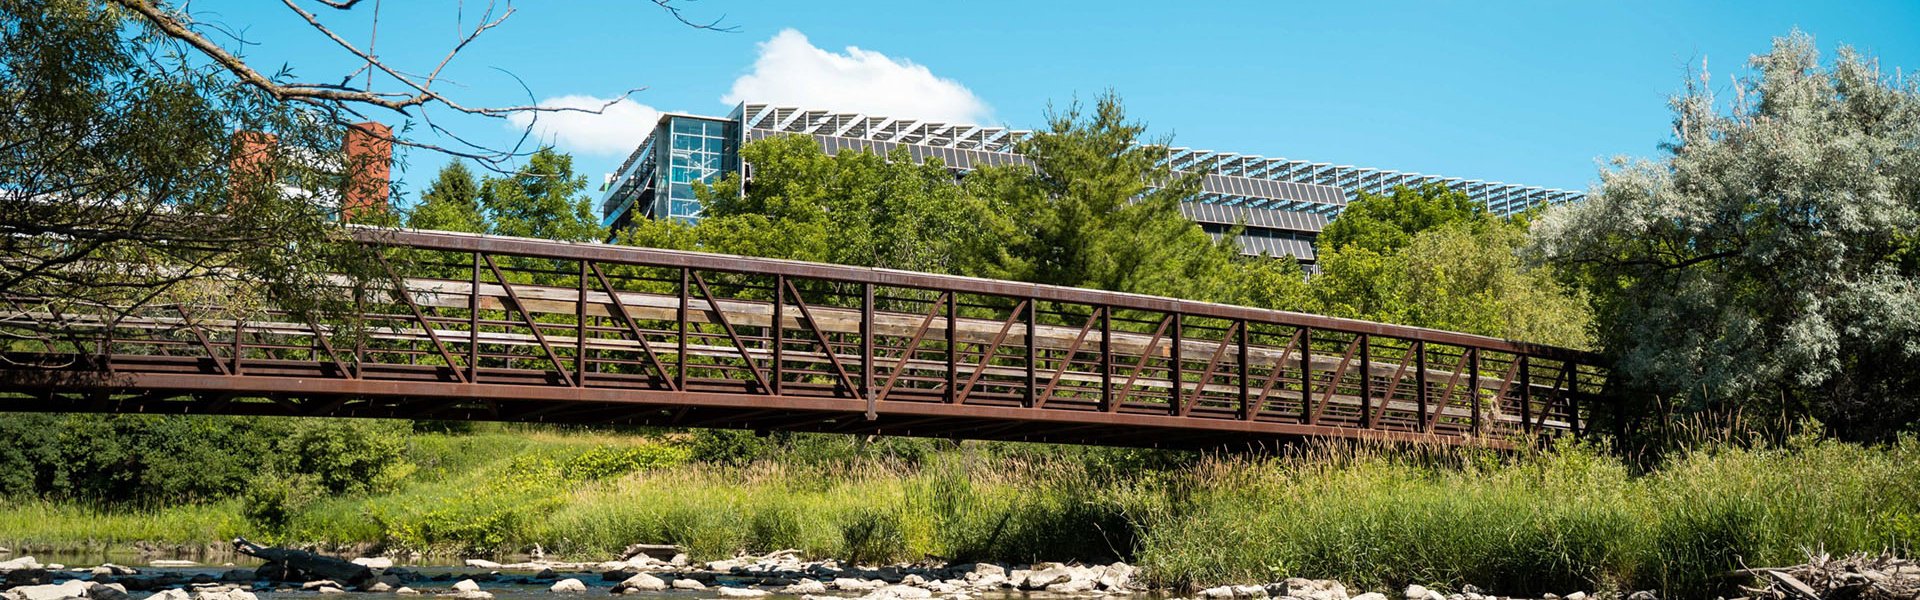 Bridge over a rocky stream at Humber's North Campus